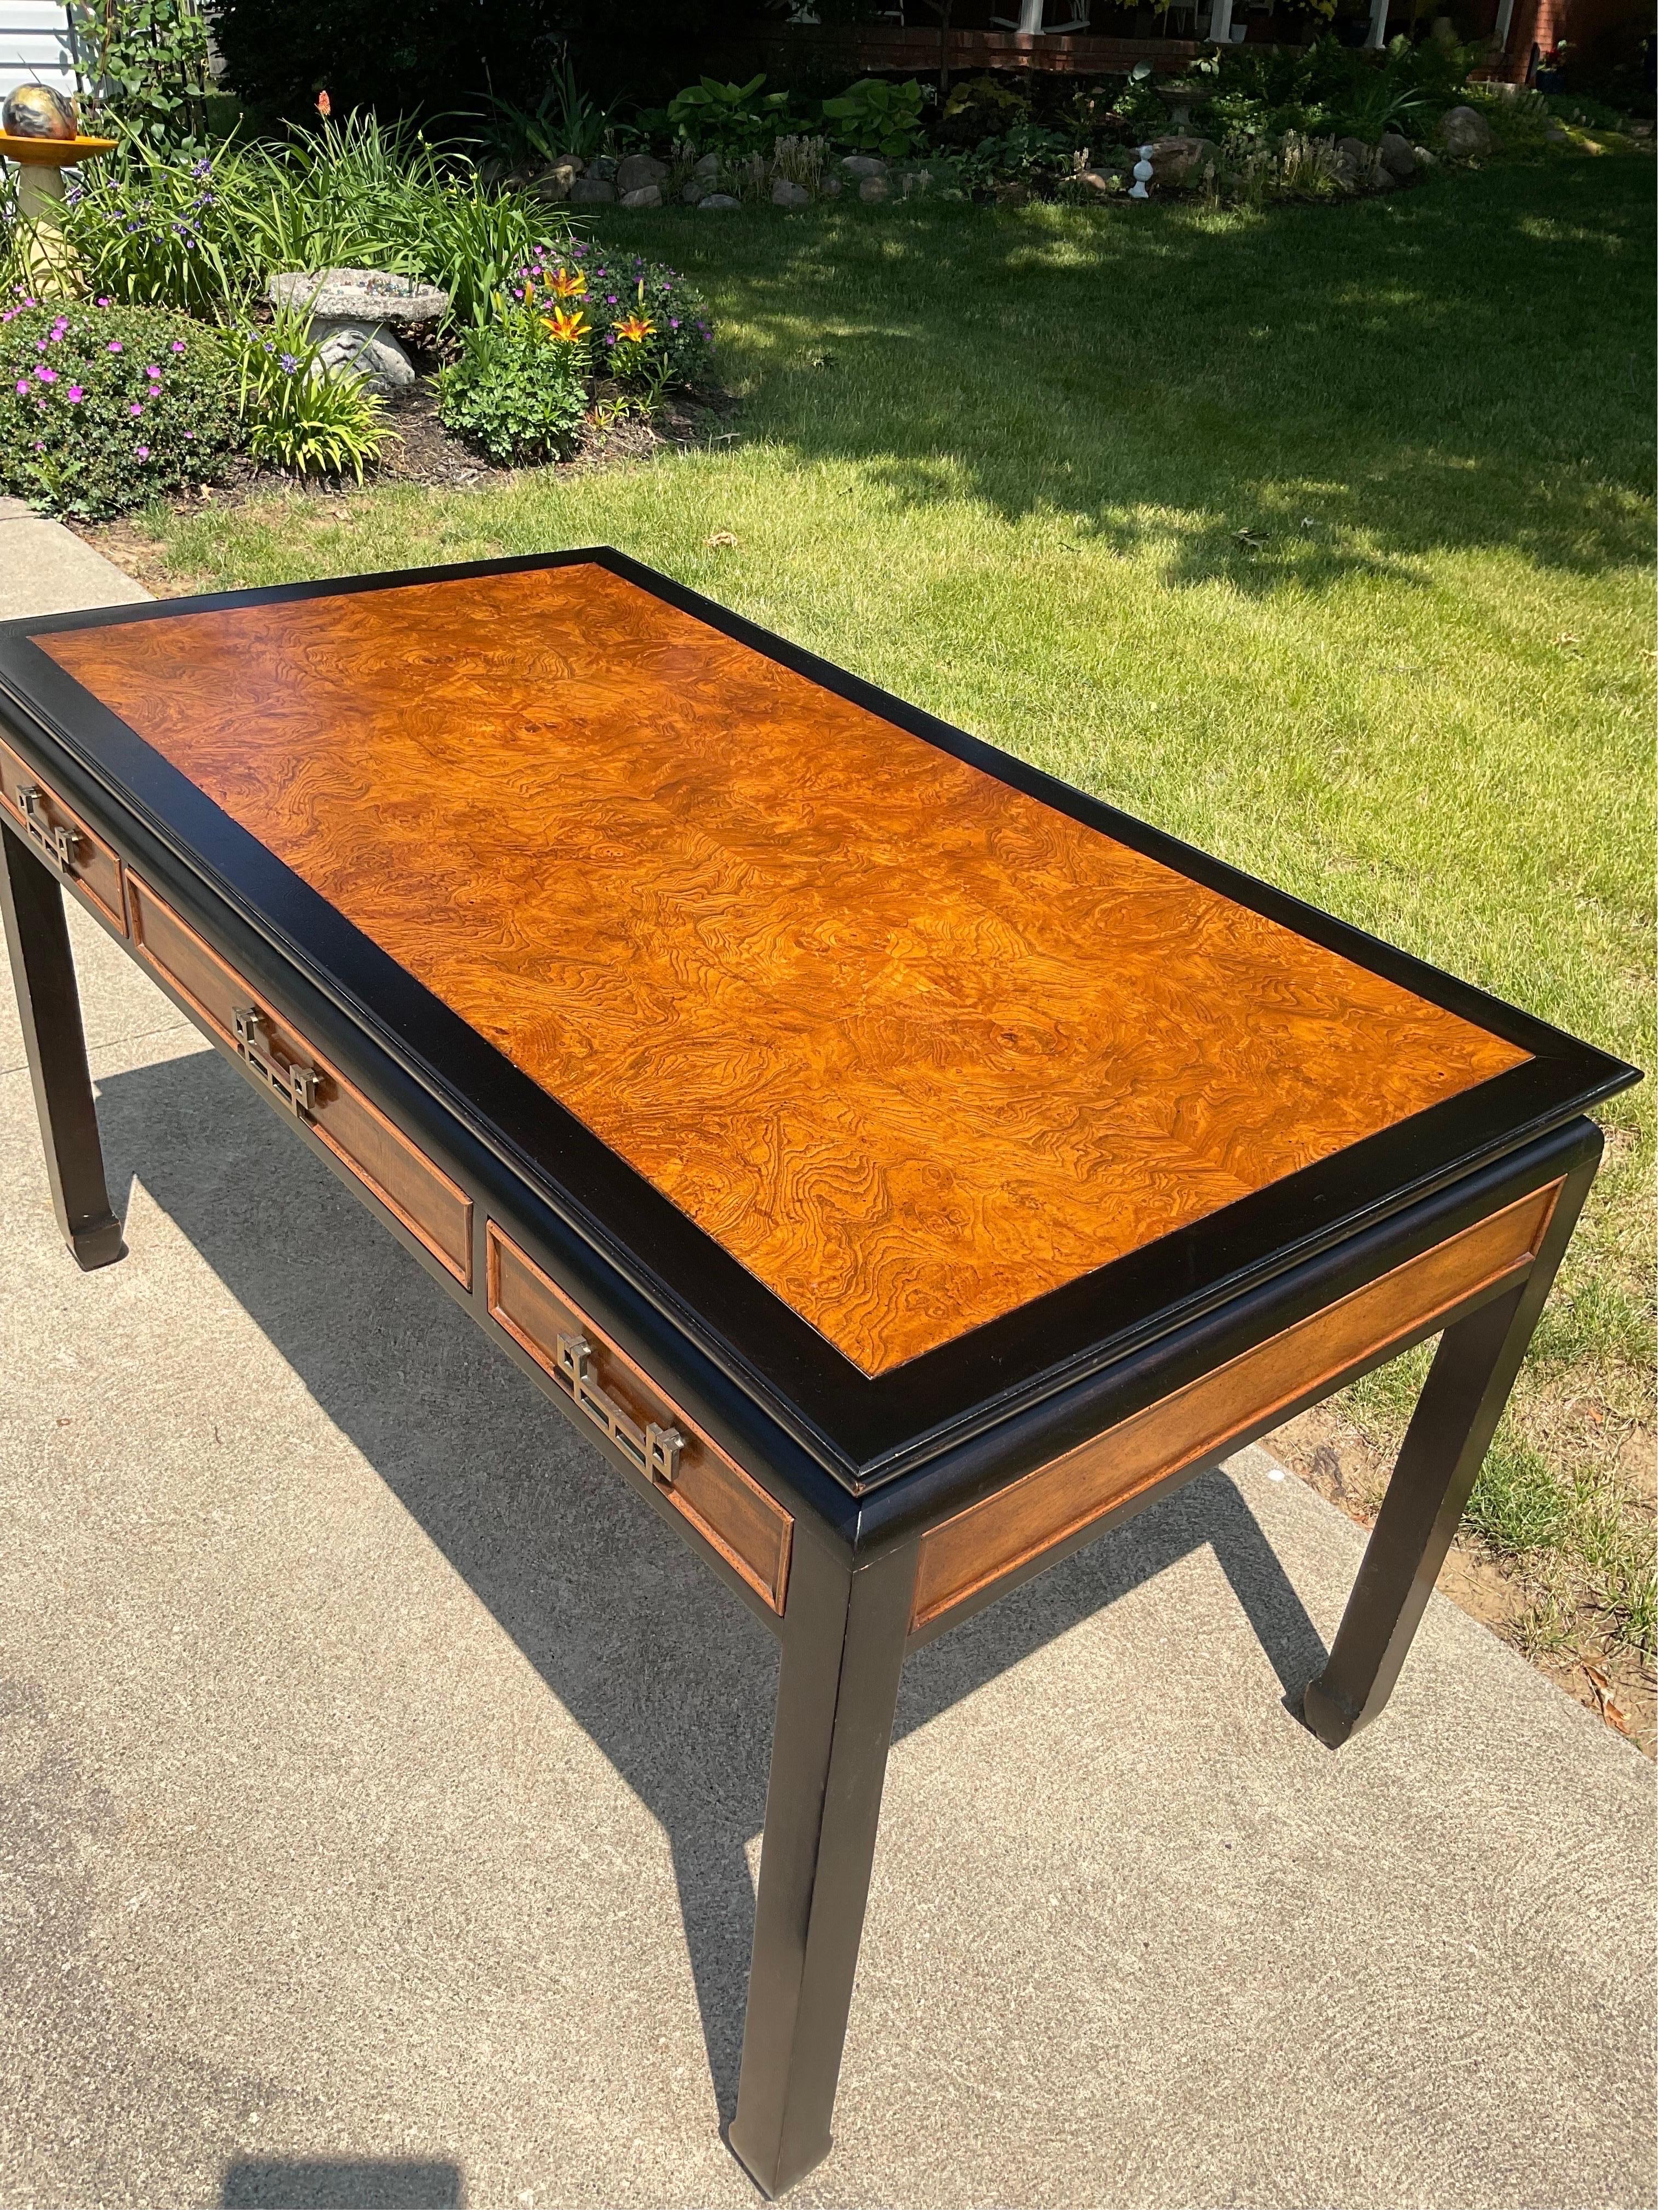 Chinoiserie 1970s Writing Desk From Century Furniture’s Chin Hua Collection by Raymond Sobot